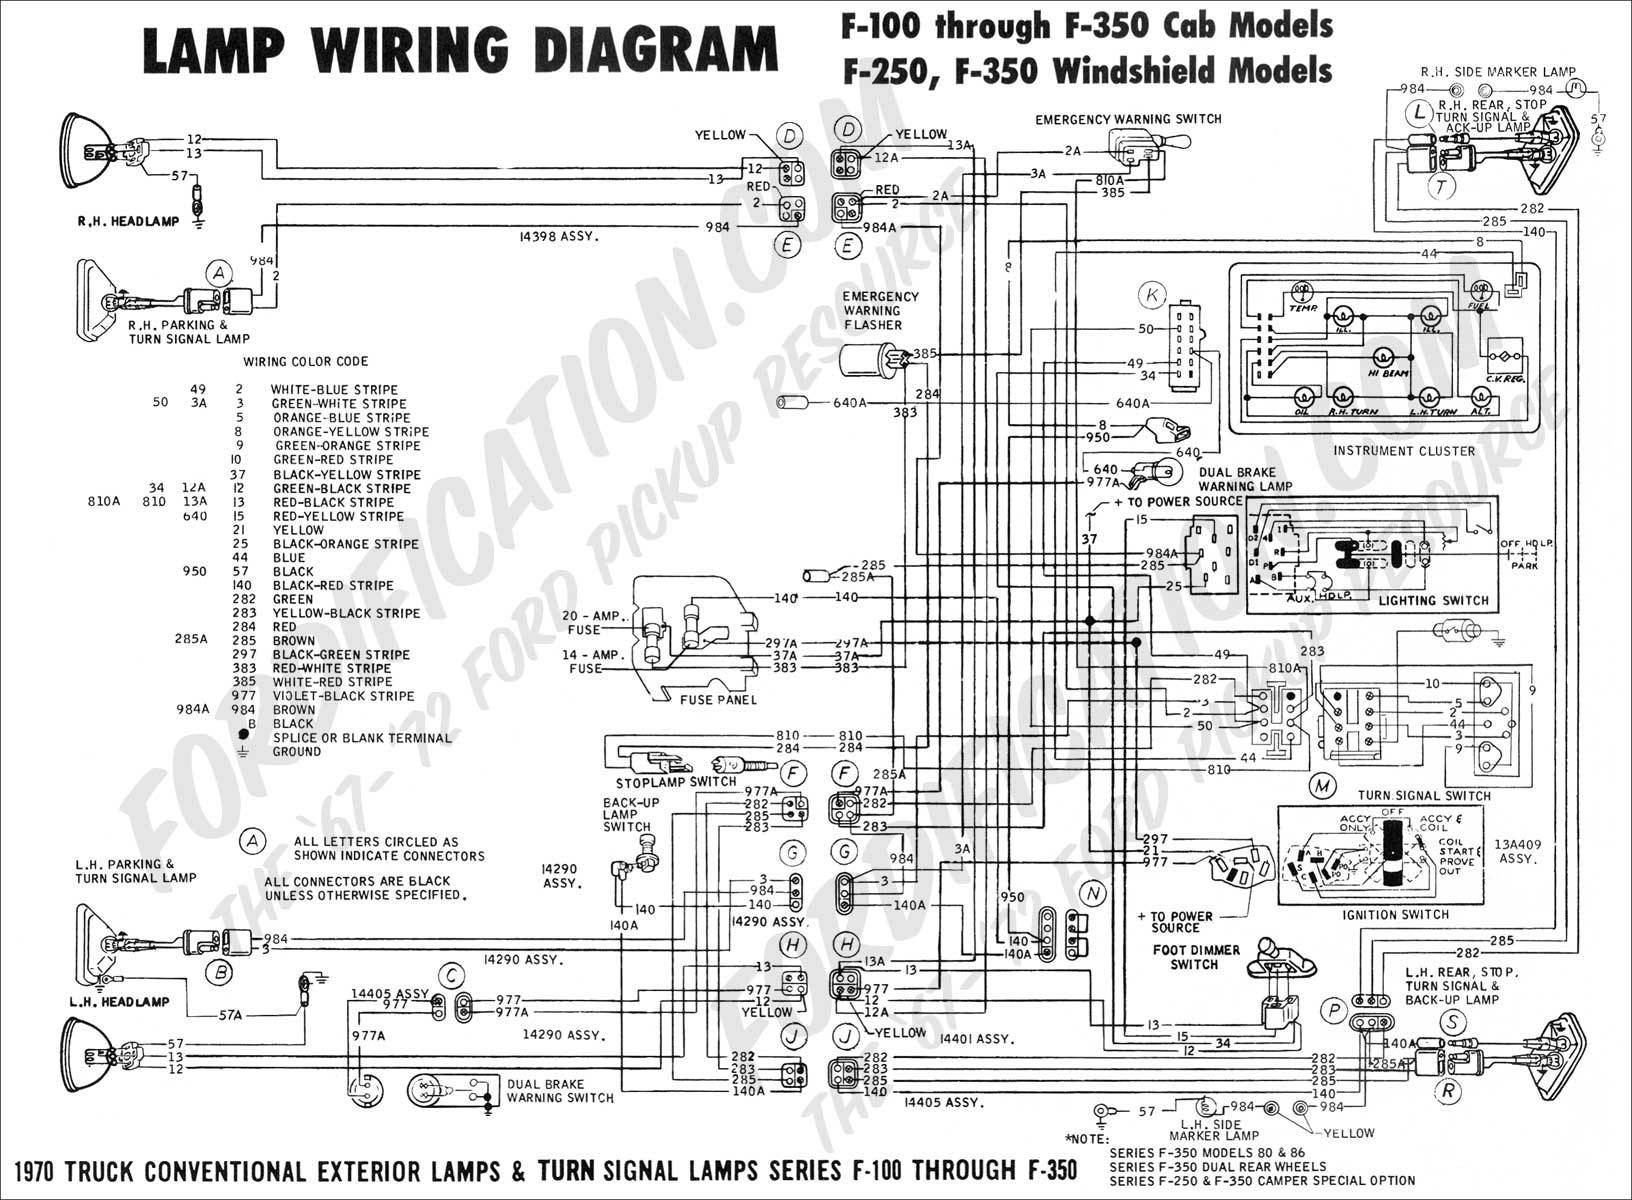 Wiring Diagram for ford F150 Trailer Lights From Truck Trailer to ford F350 Wiring Diagram Wiring Diagram